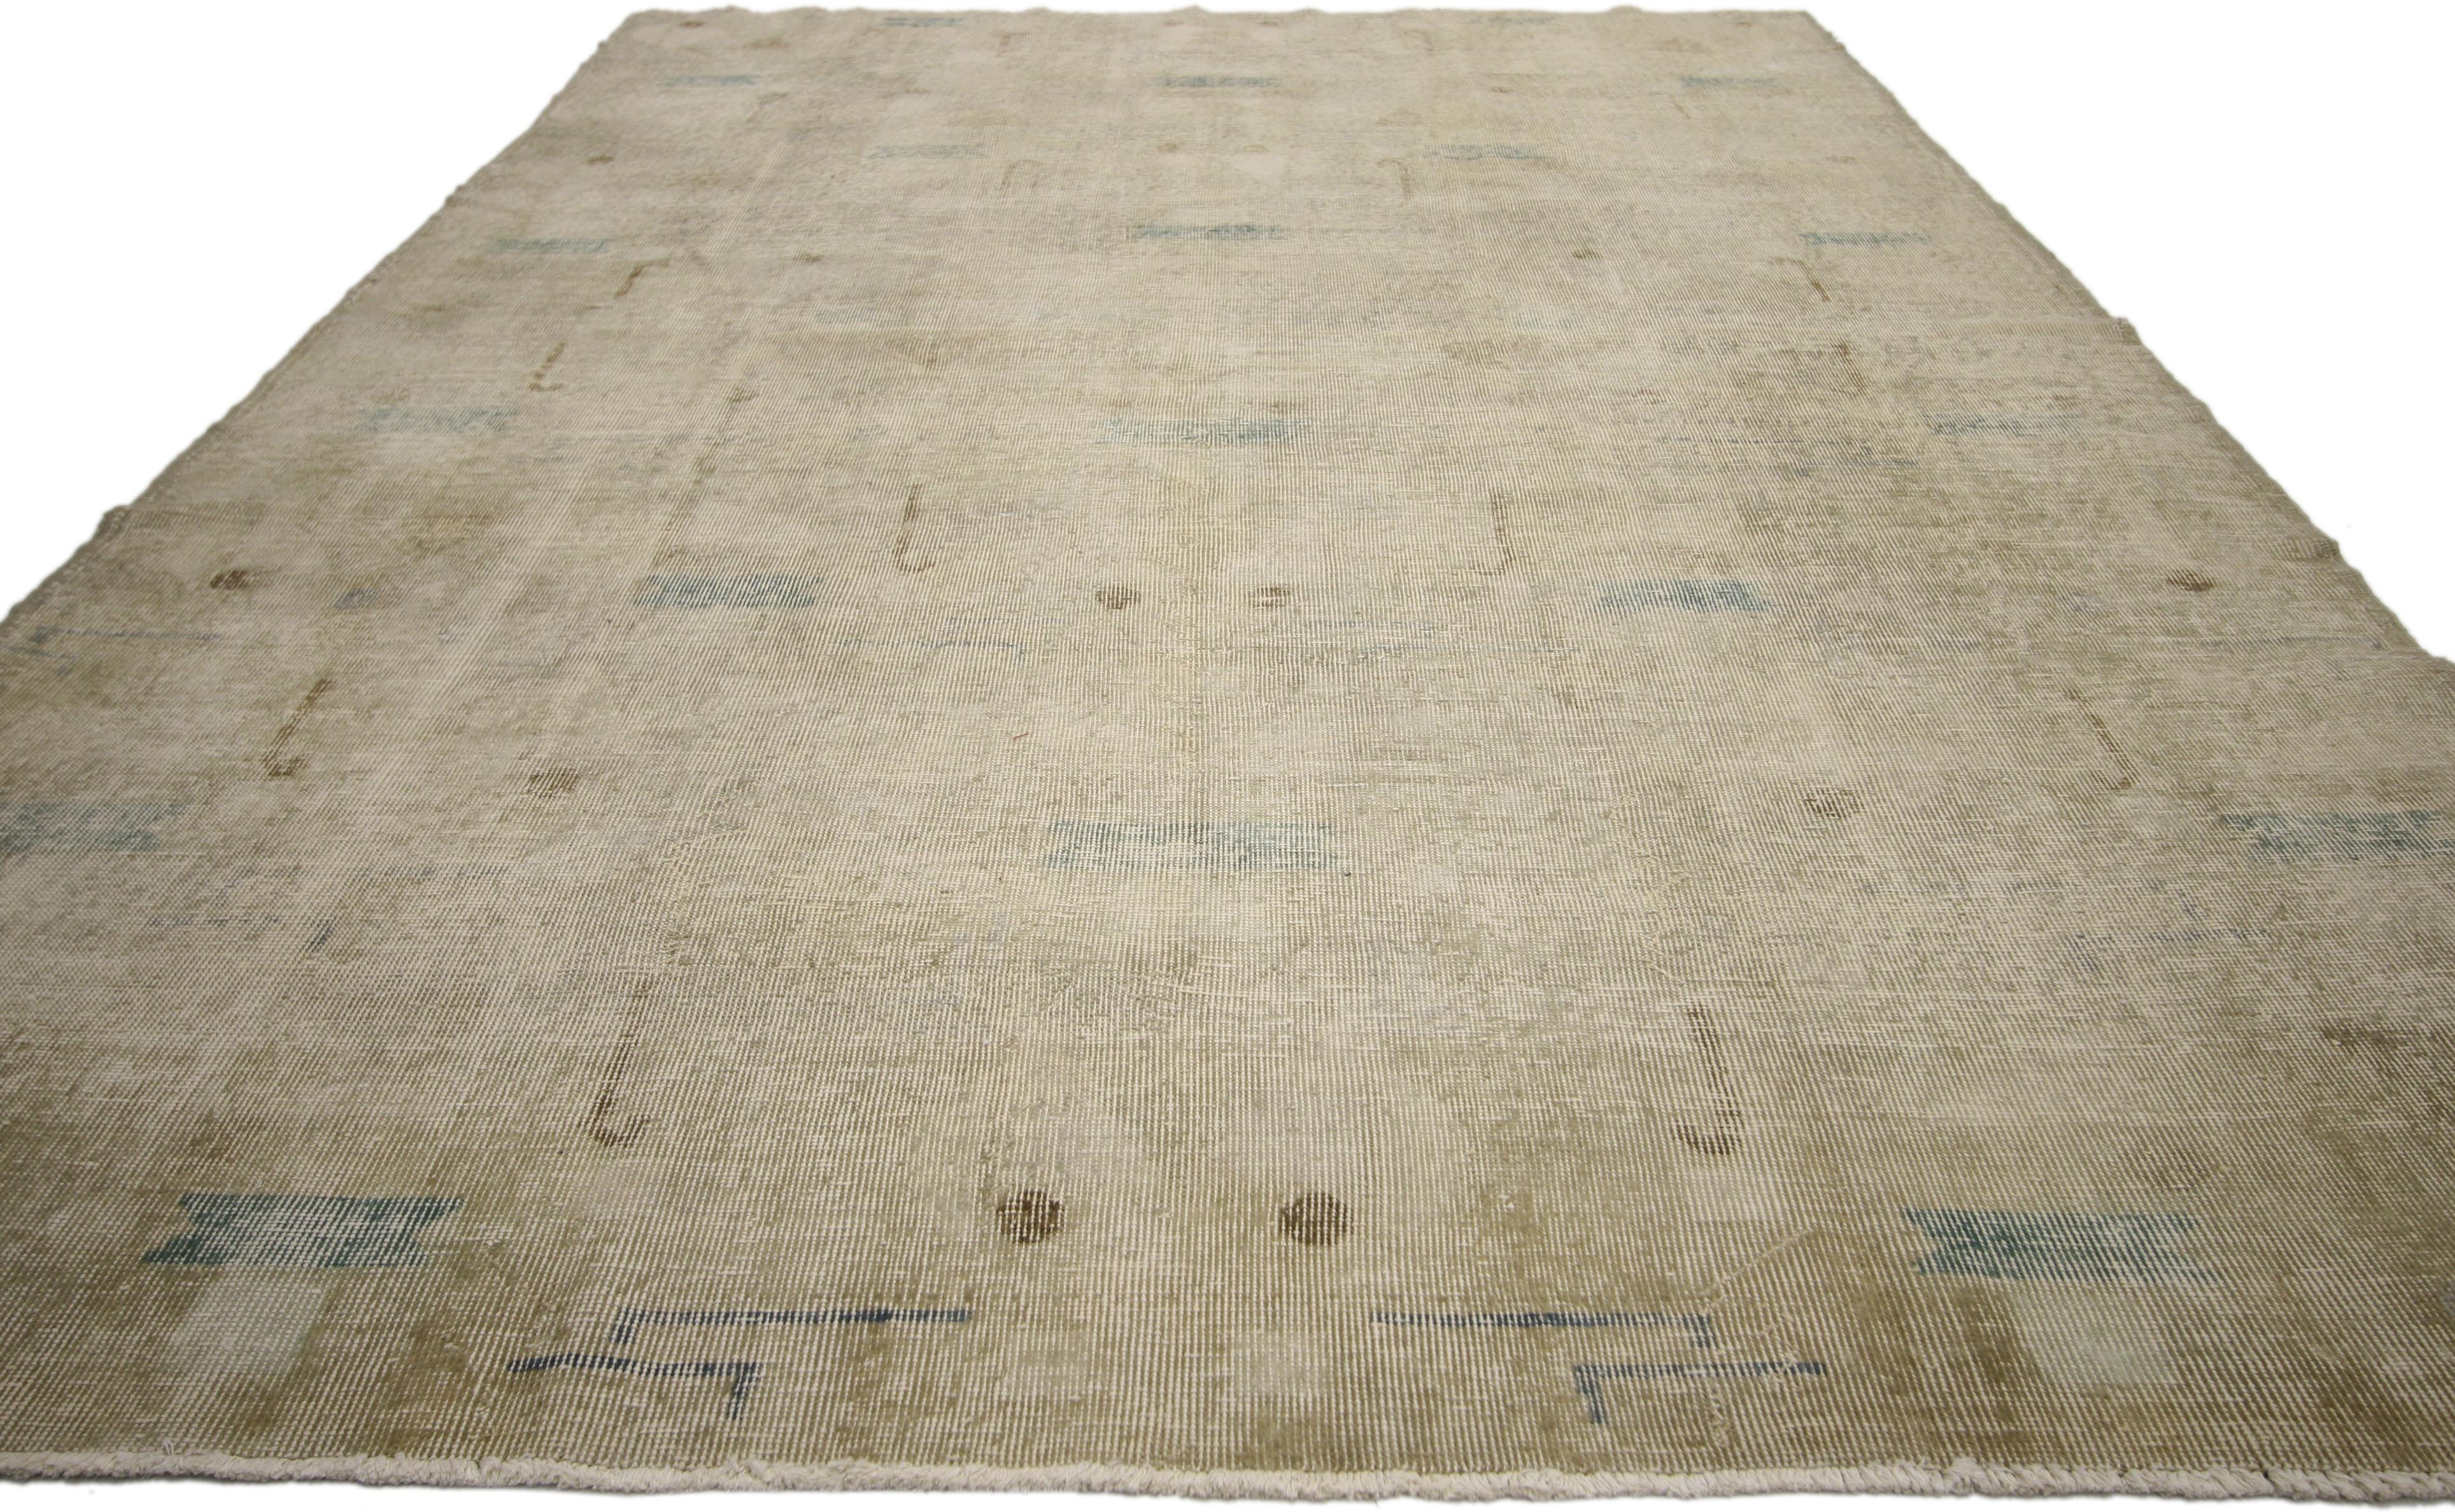 51158, Distressed Sivas rug with Industrial Art Deco style with muted colors. Understated elegance meets geometric dynamism in this distressed vintage Turkish Sivas rug with Industrial Art Deco style. Infused with the aesthetic of famed Turkish